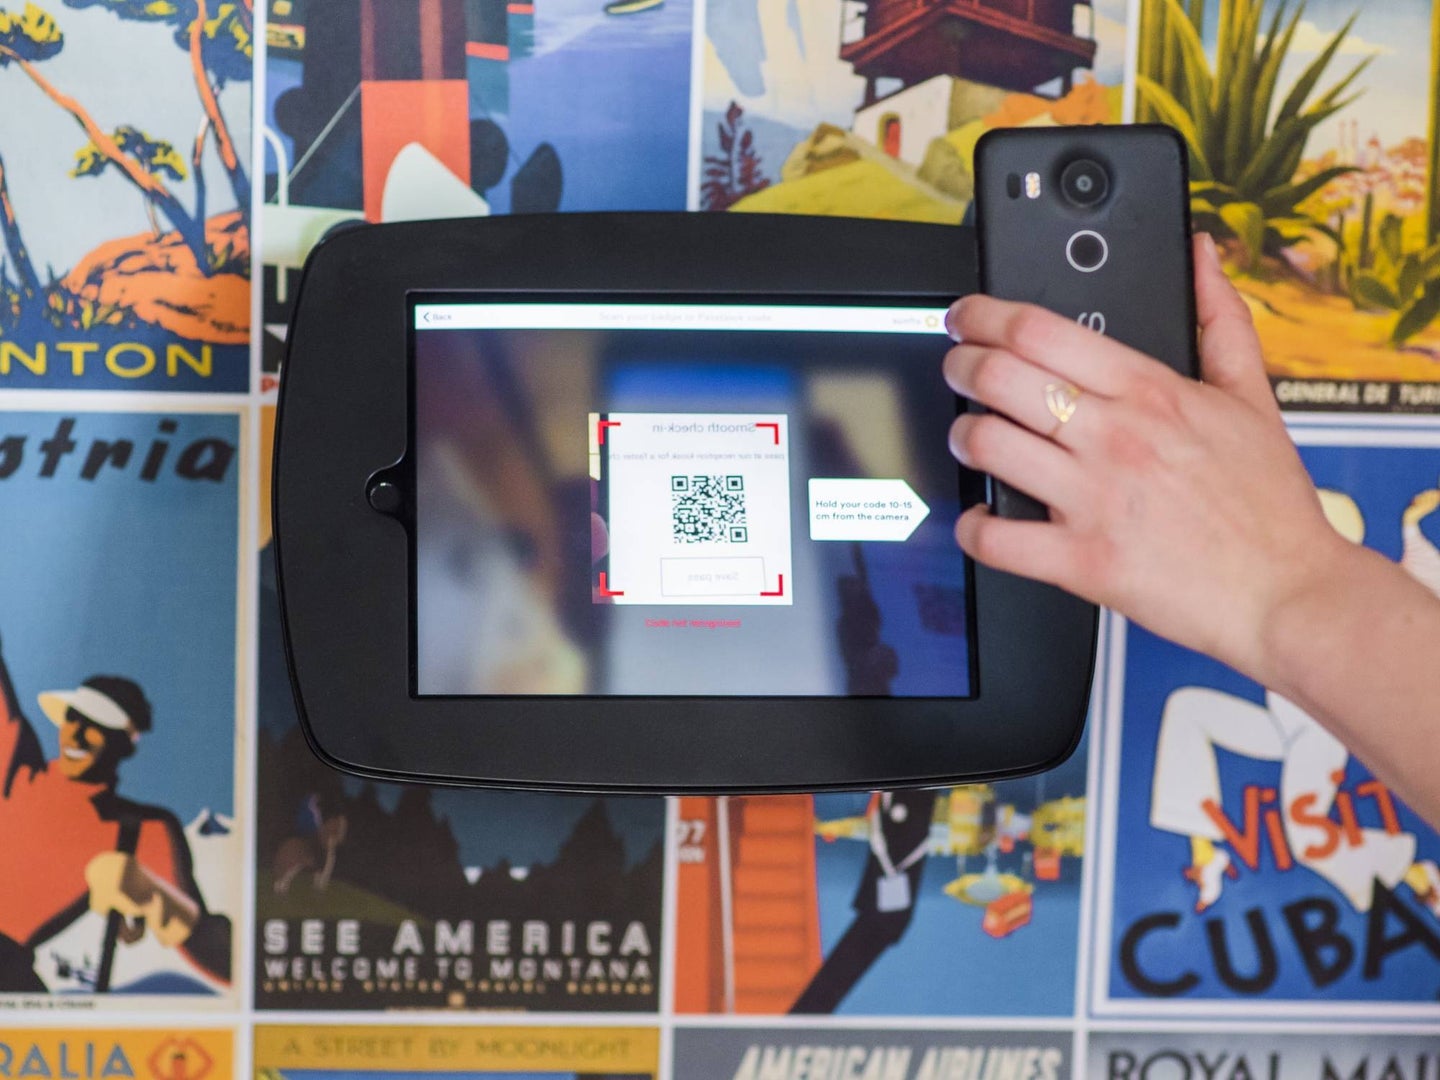 A hand holding a phone and scanning a QR code from a tablet.